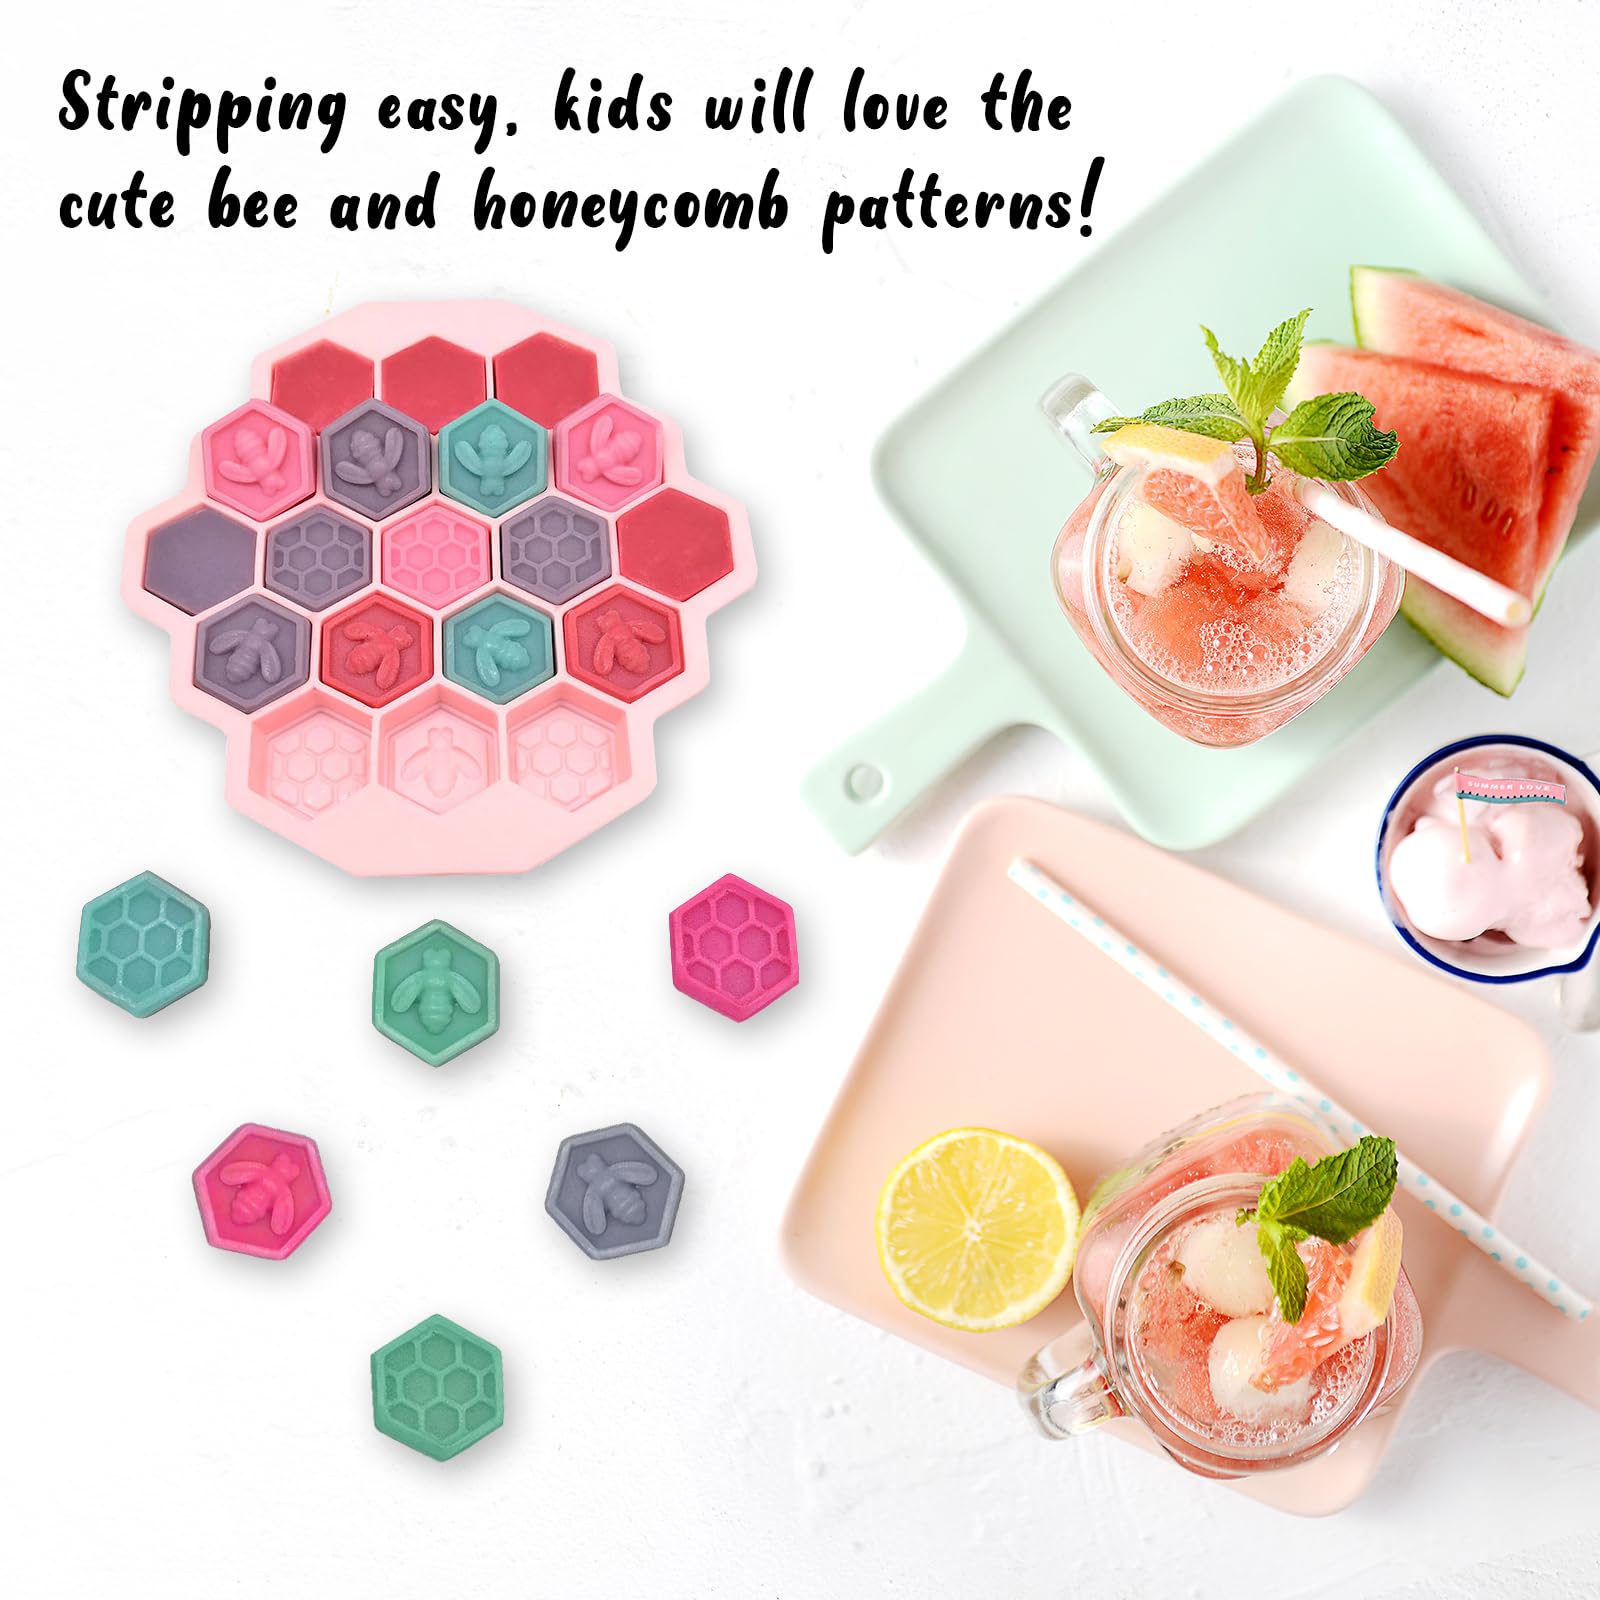 3PCS Silicone Molds Bee Honeycomb, LIOUCBD Non-Stick Chocolate Molds, 19 Cavities Cake Baking Moulds Food Grade Silicone Baking Molds for Candy, Jelly, Ice Cube, Soap (Pink, Blue, Green)